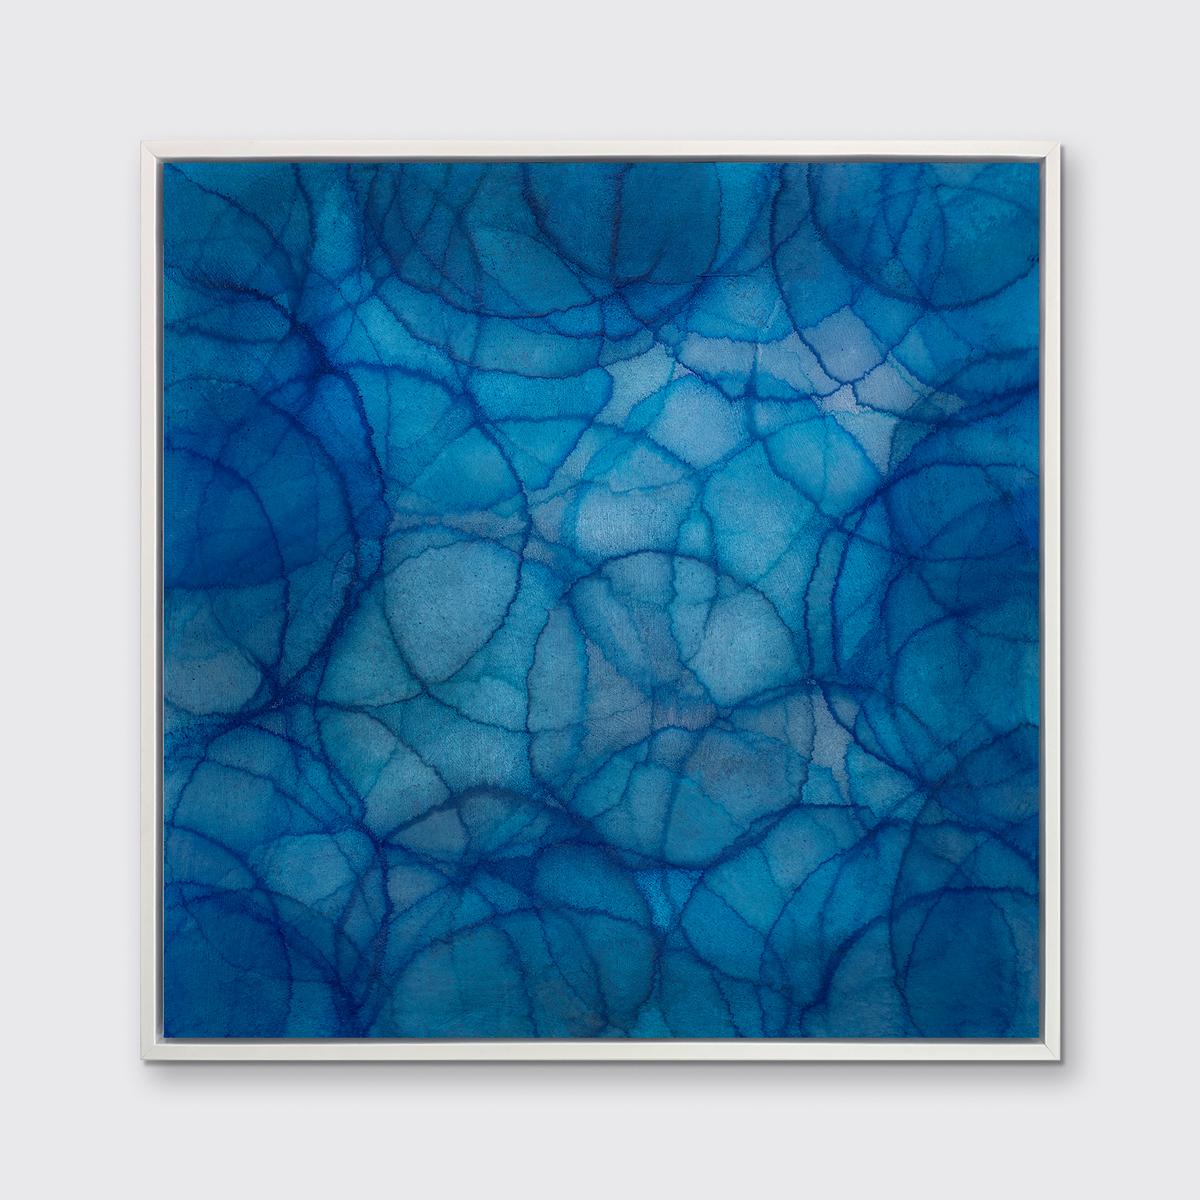 This Limited Edition giclee print by Roger Mudre features features a cool-toned palette with an iridescent quality. Circles with light outlines overlap one another in varying blue, green, white shades to create a larger blue circular form at the